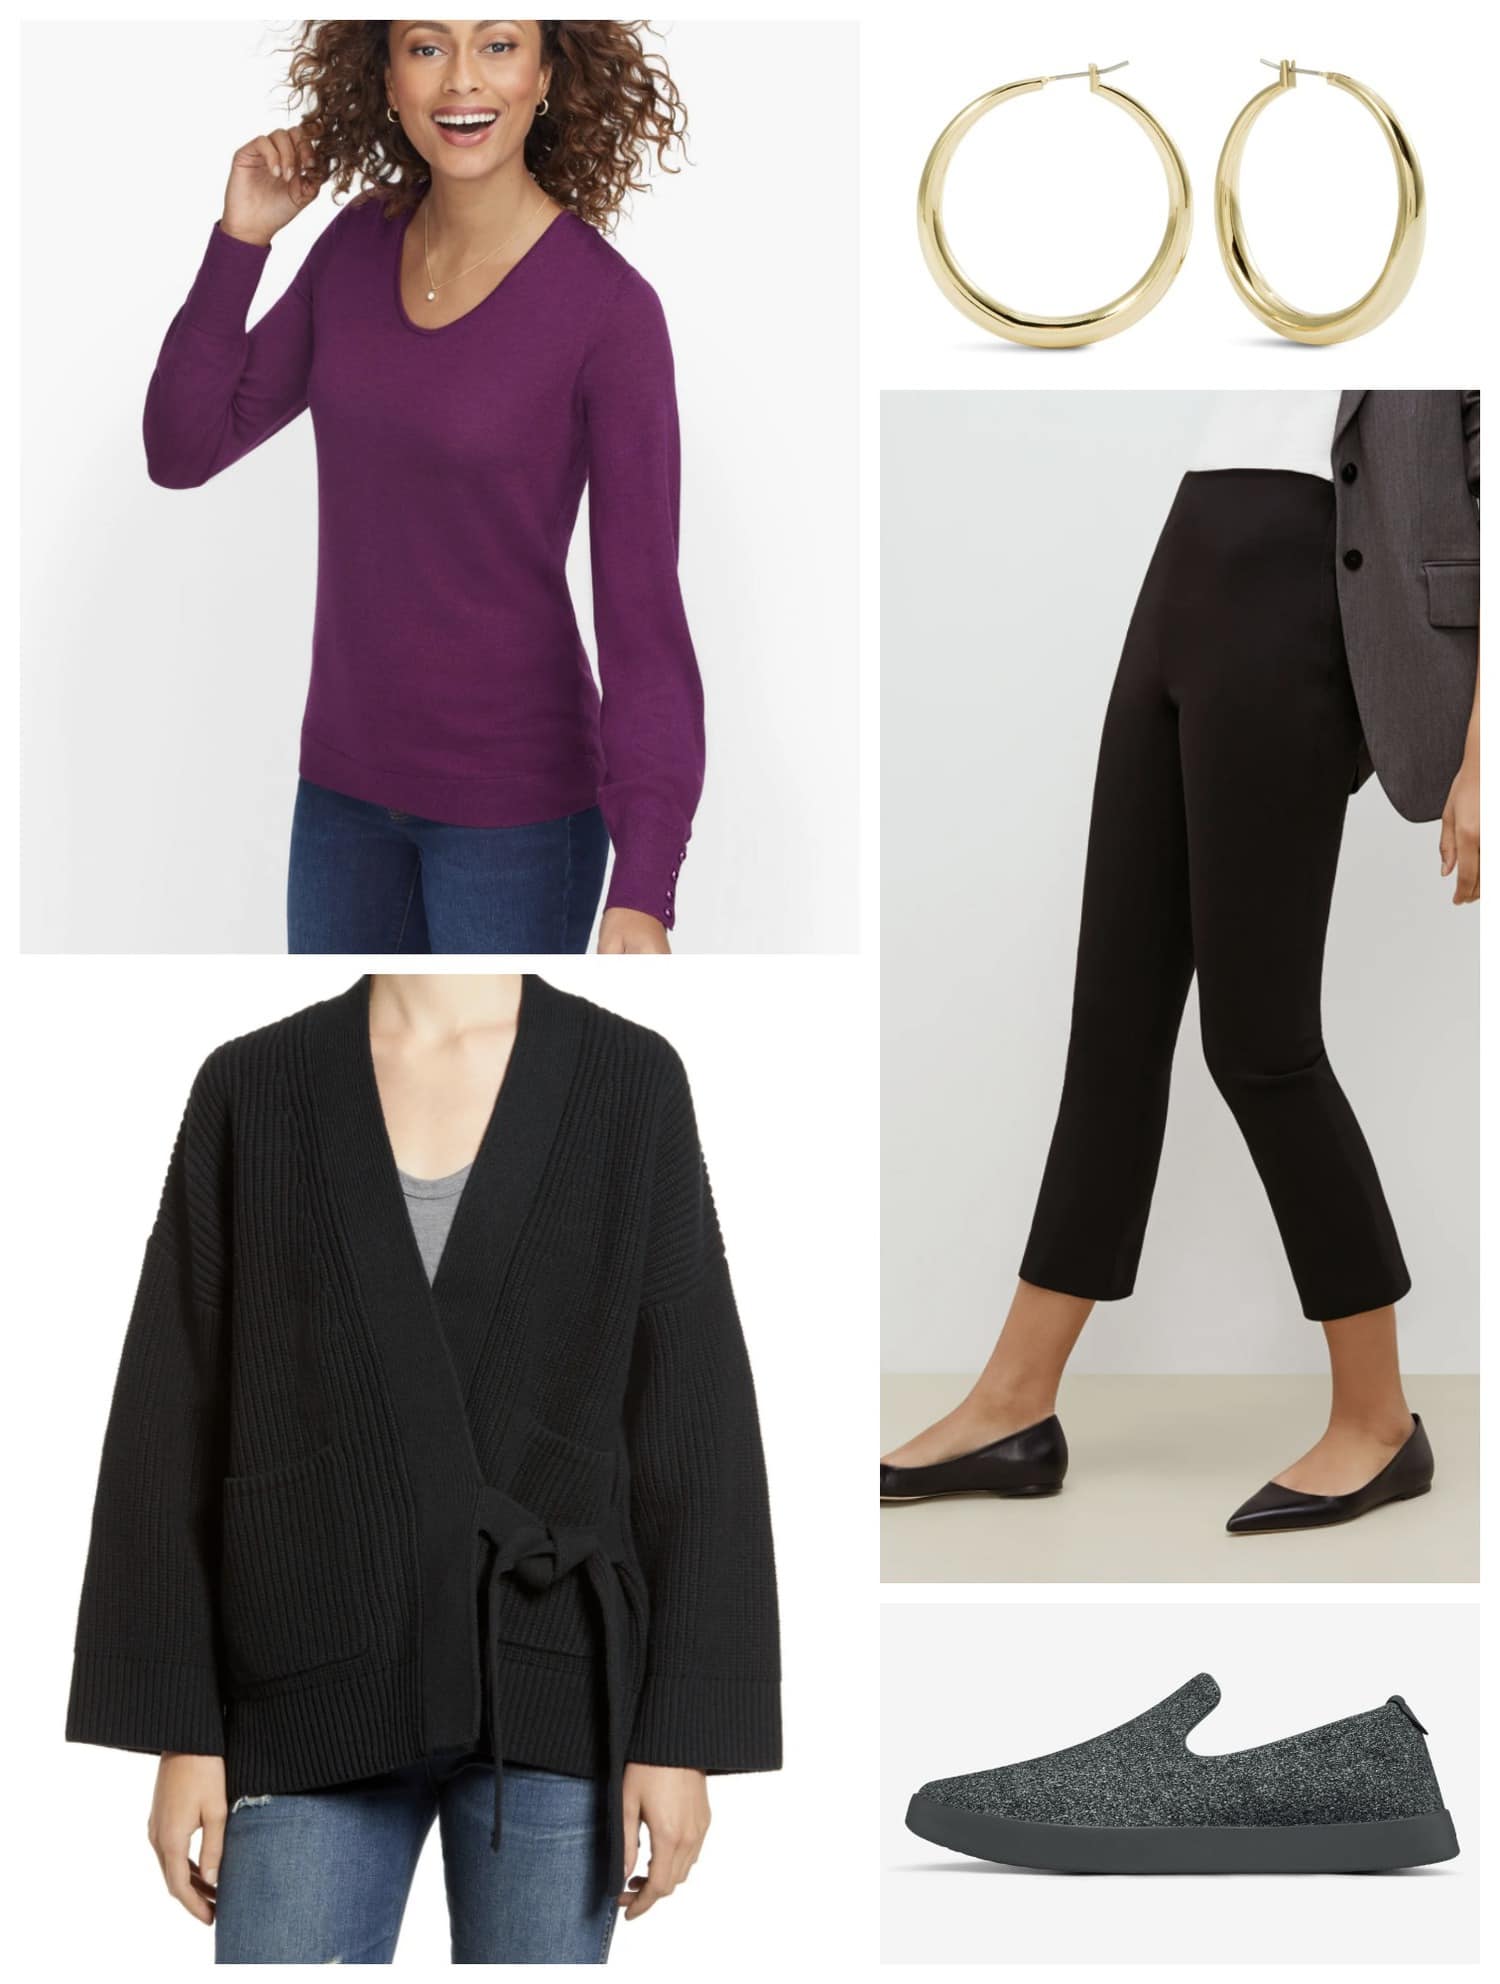 Black and Berry with a Madewell cardigan over a Talbots lightweight merino v-neck